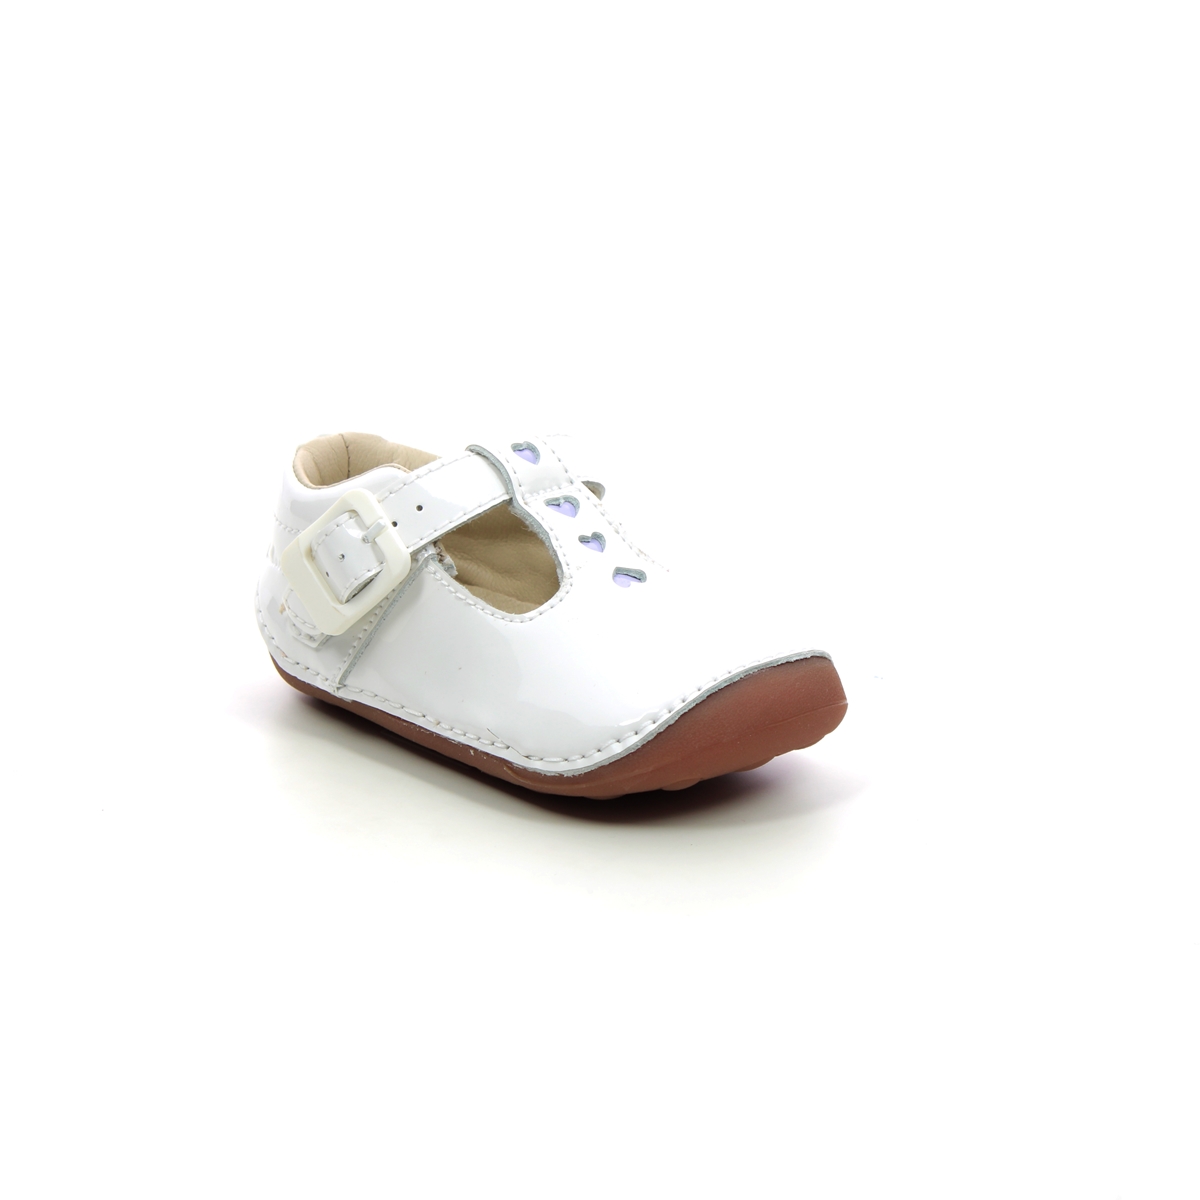 Clarks Tiny Beat T White patent Kids girls first and baby shoes 7158-76F in a Plain Leather in Size 2